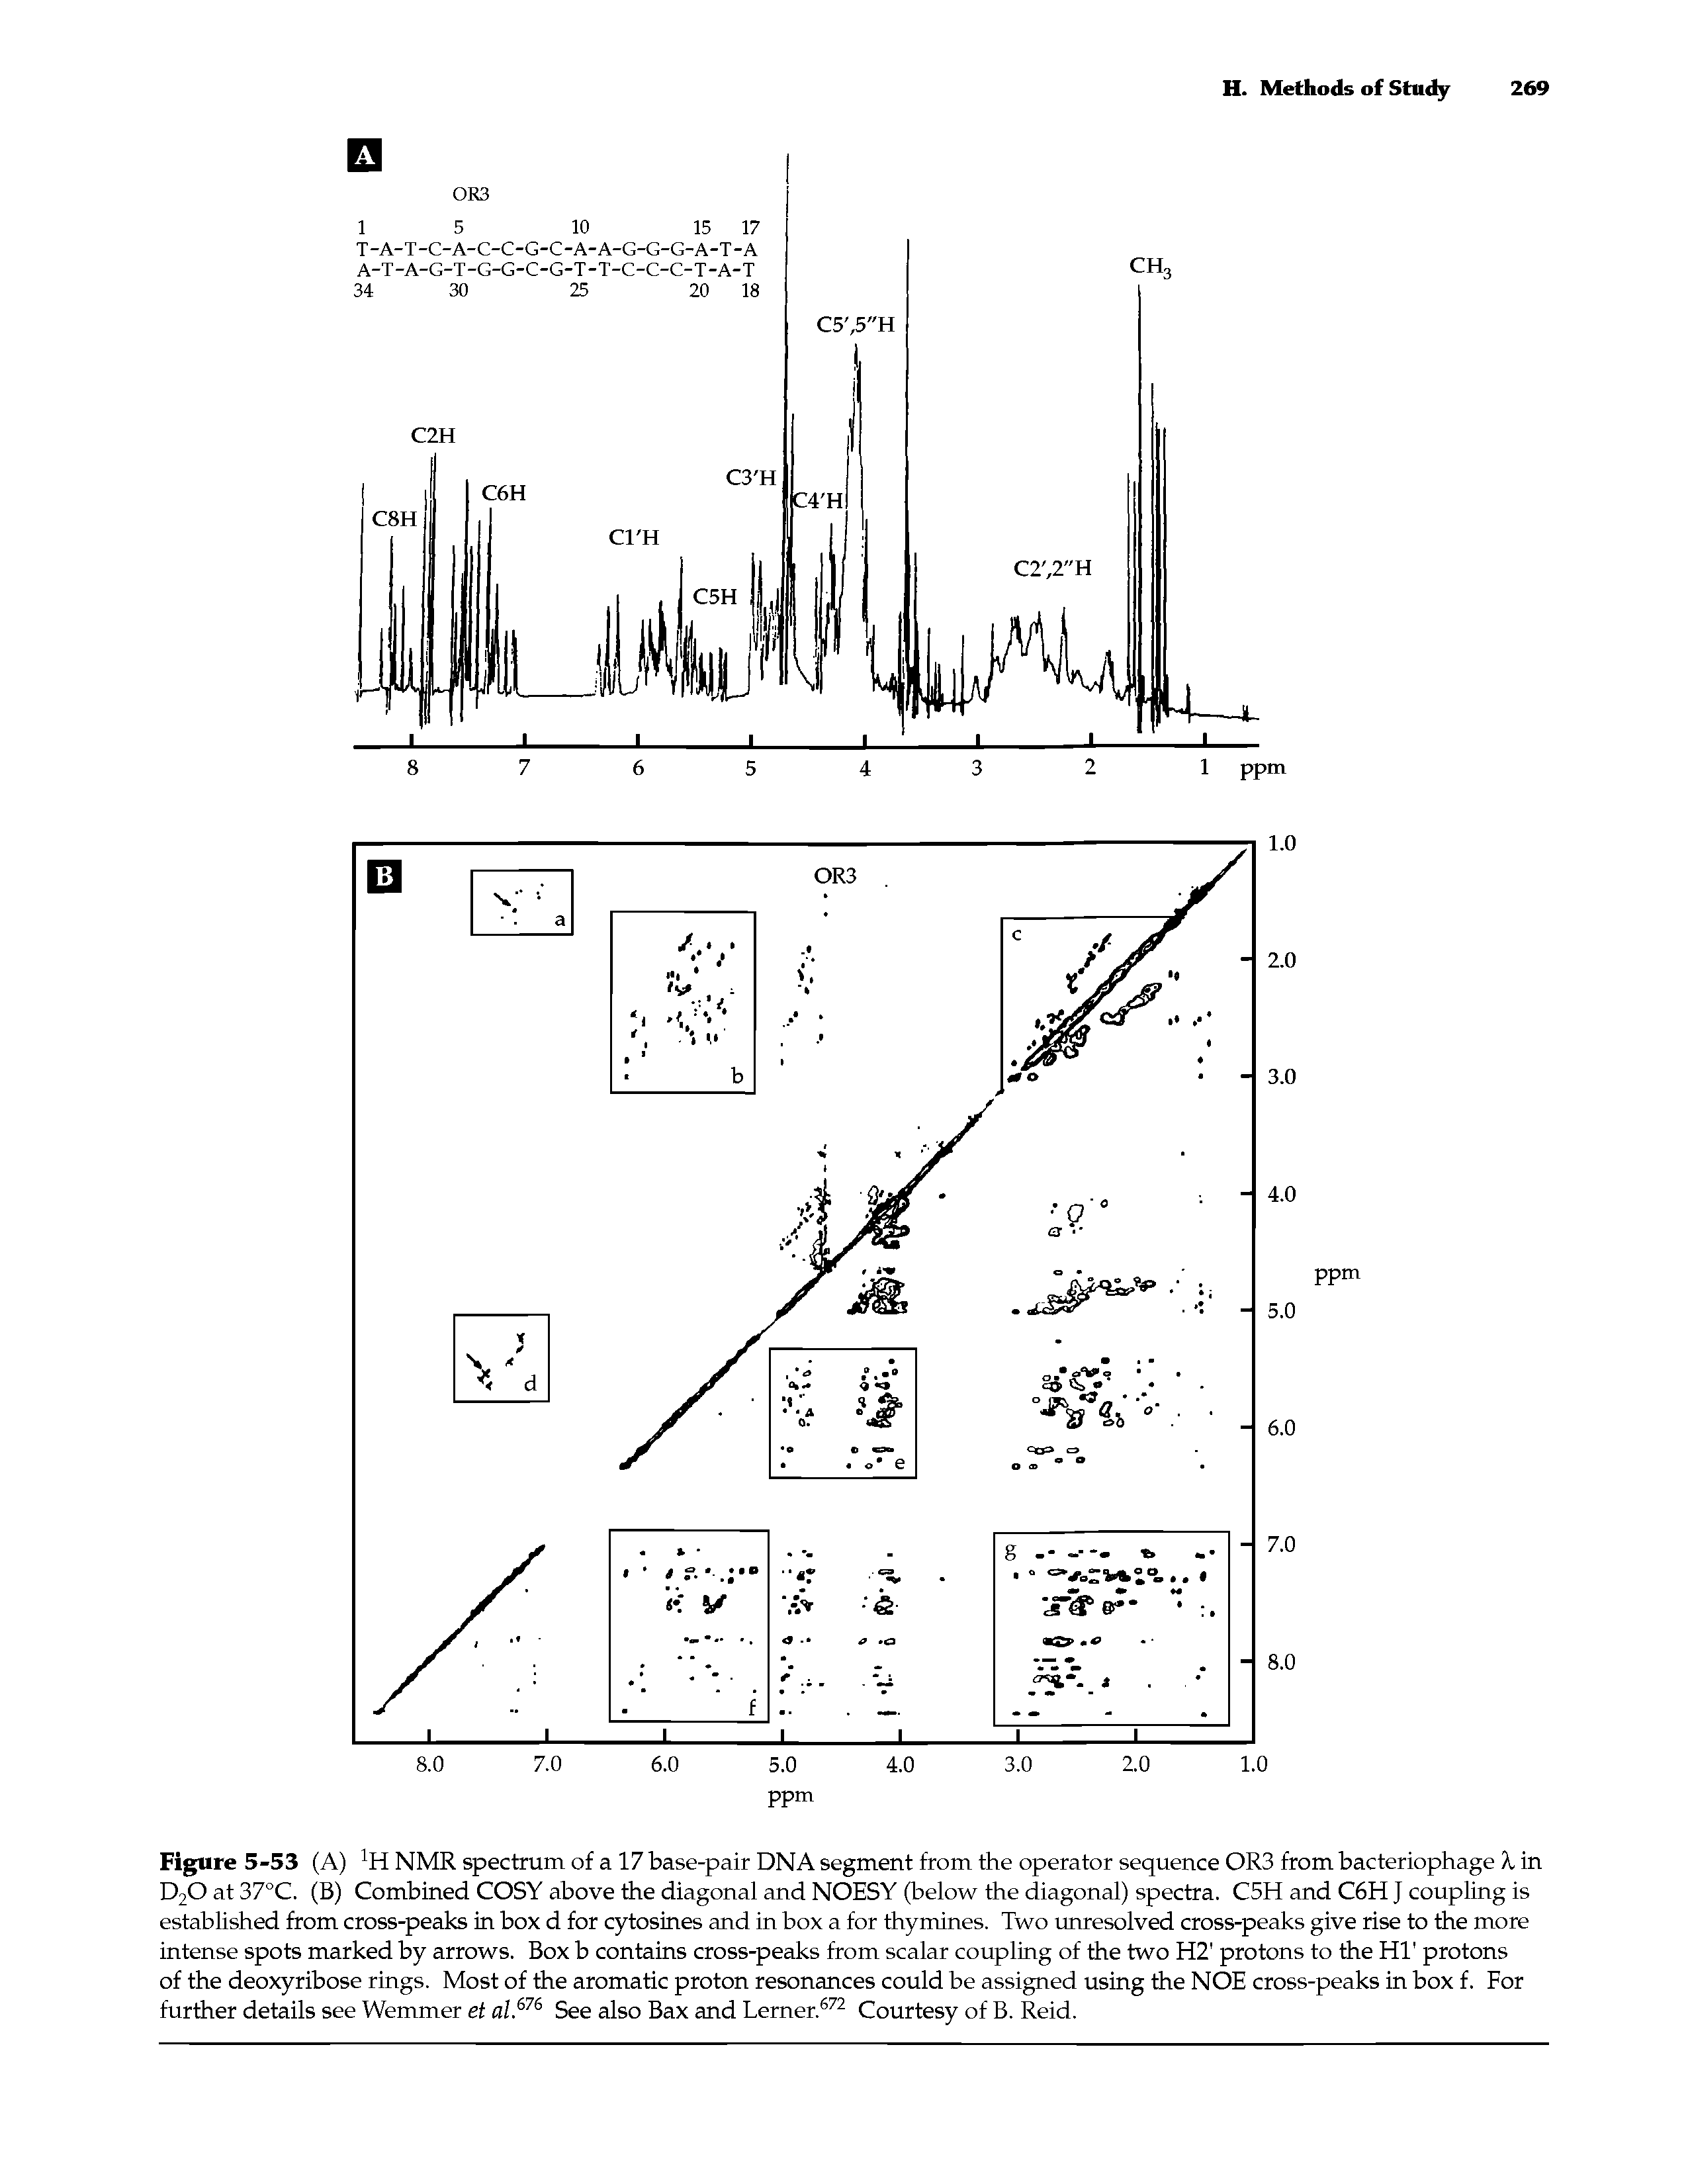 Figure 5-53 (A) JH NMR spectrum of a 17 base-pair DNA segment from the operator sequence OR3 from bacteriophage X in D20 at 37°C. (B) Combined COSY above the diagonal and NOESY (below the diagonal) spectra. C5H and C6H J coupling is established from cross-peaks in box d for cytosines and in box a for thymines. Two unresolved cross-peaks give rise to the more intense spots marked by arrows. Box b contains cross-peaks from scalar coupling of the two H2 protons to the HT protons of the deoxyribose rings. Most of the aromatic proton resonances could be assigned using the NOE cross-peaks in box f. For further details see Wemmer et al.676 See also Bax and Lerner.672 Courtesy of B. Reid.